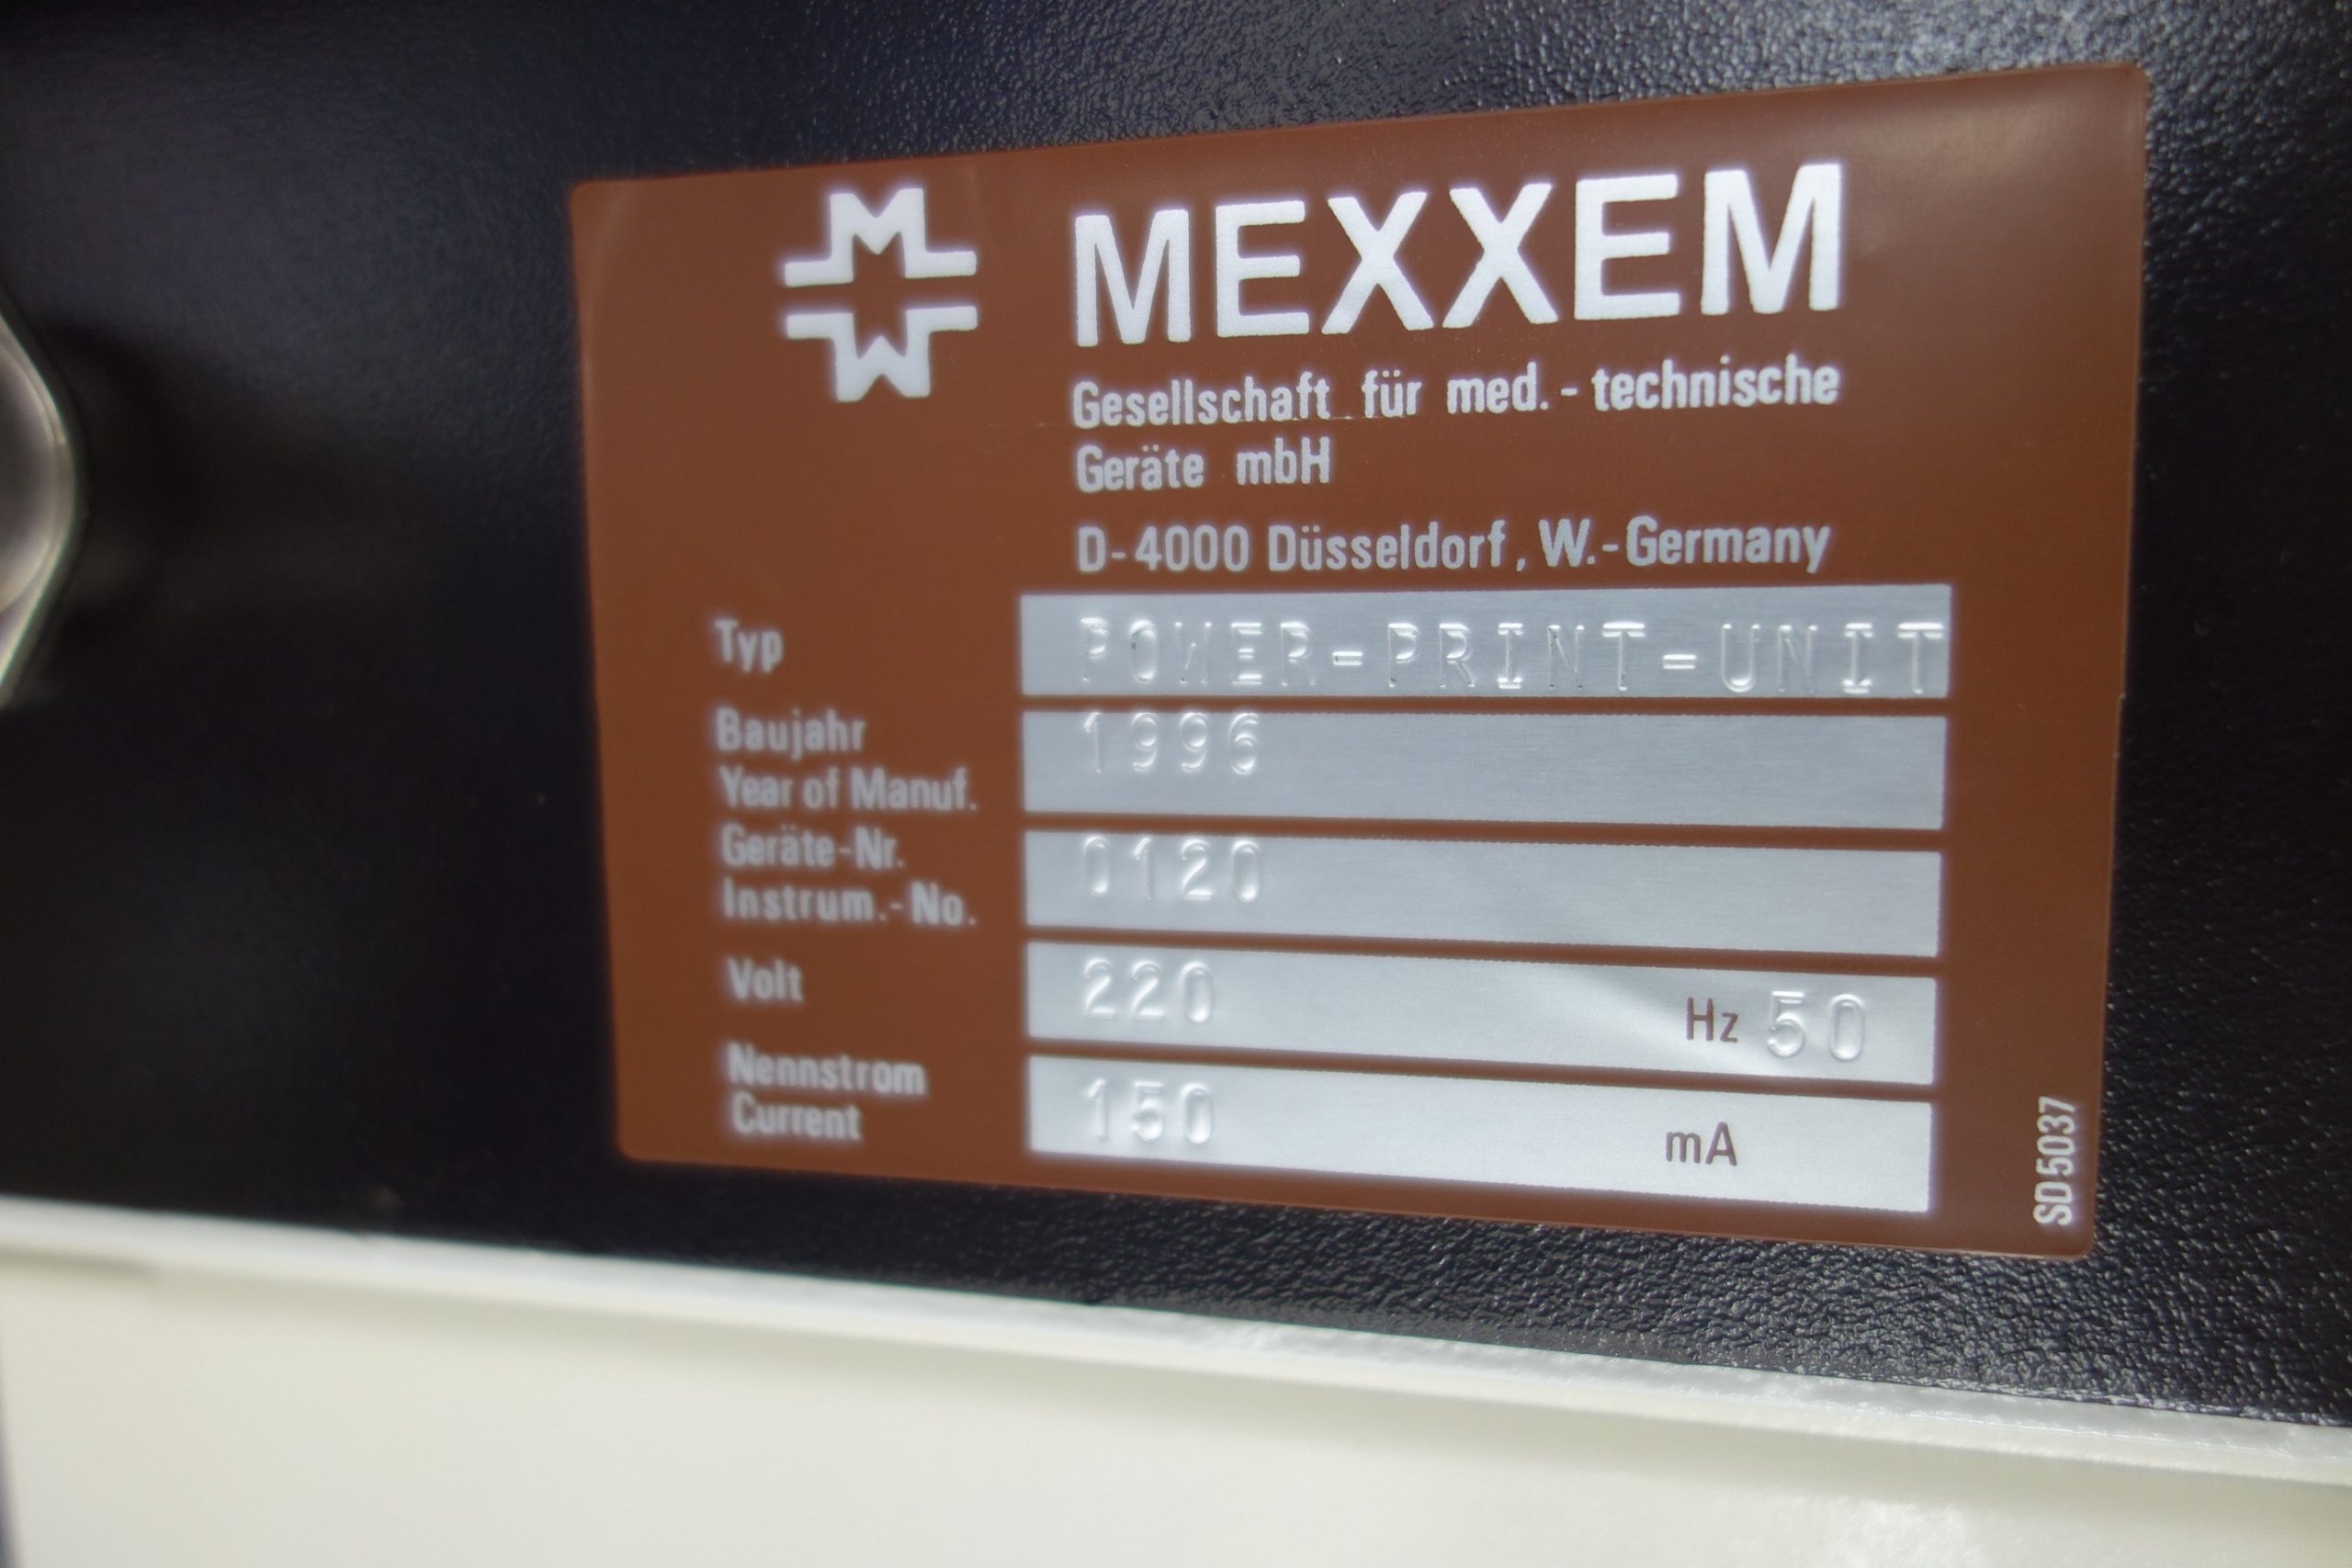 mexxem-hematology-systems-bc-1a-multi-7-mit-diluter-power-print-unit-4614